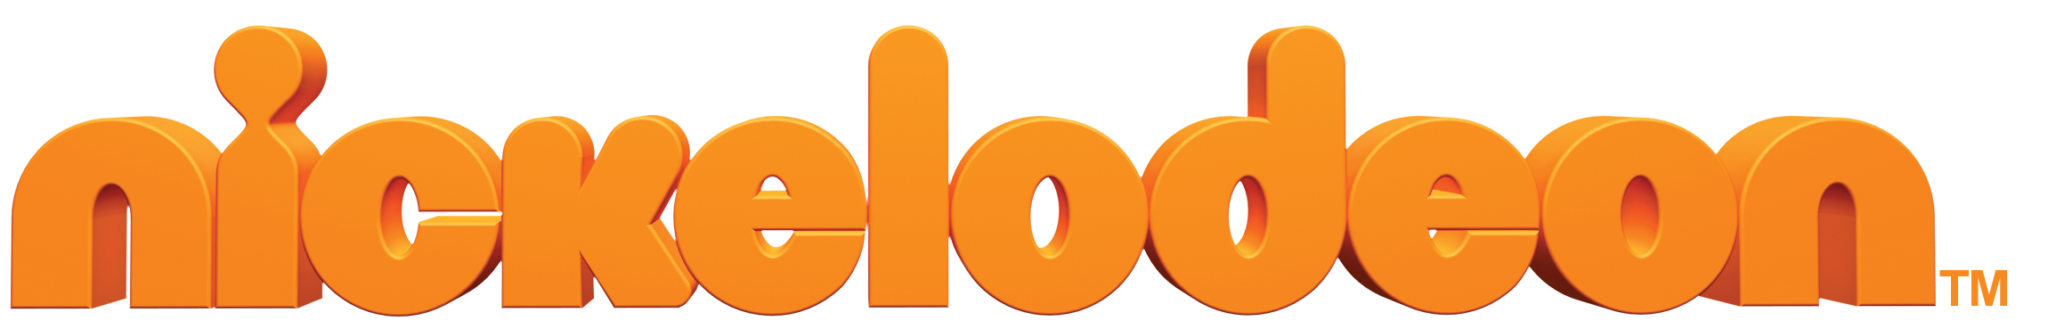 Nickelodeon Hit with Layoffs as Viacom Undergoes Restructuring ...